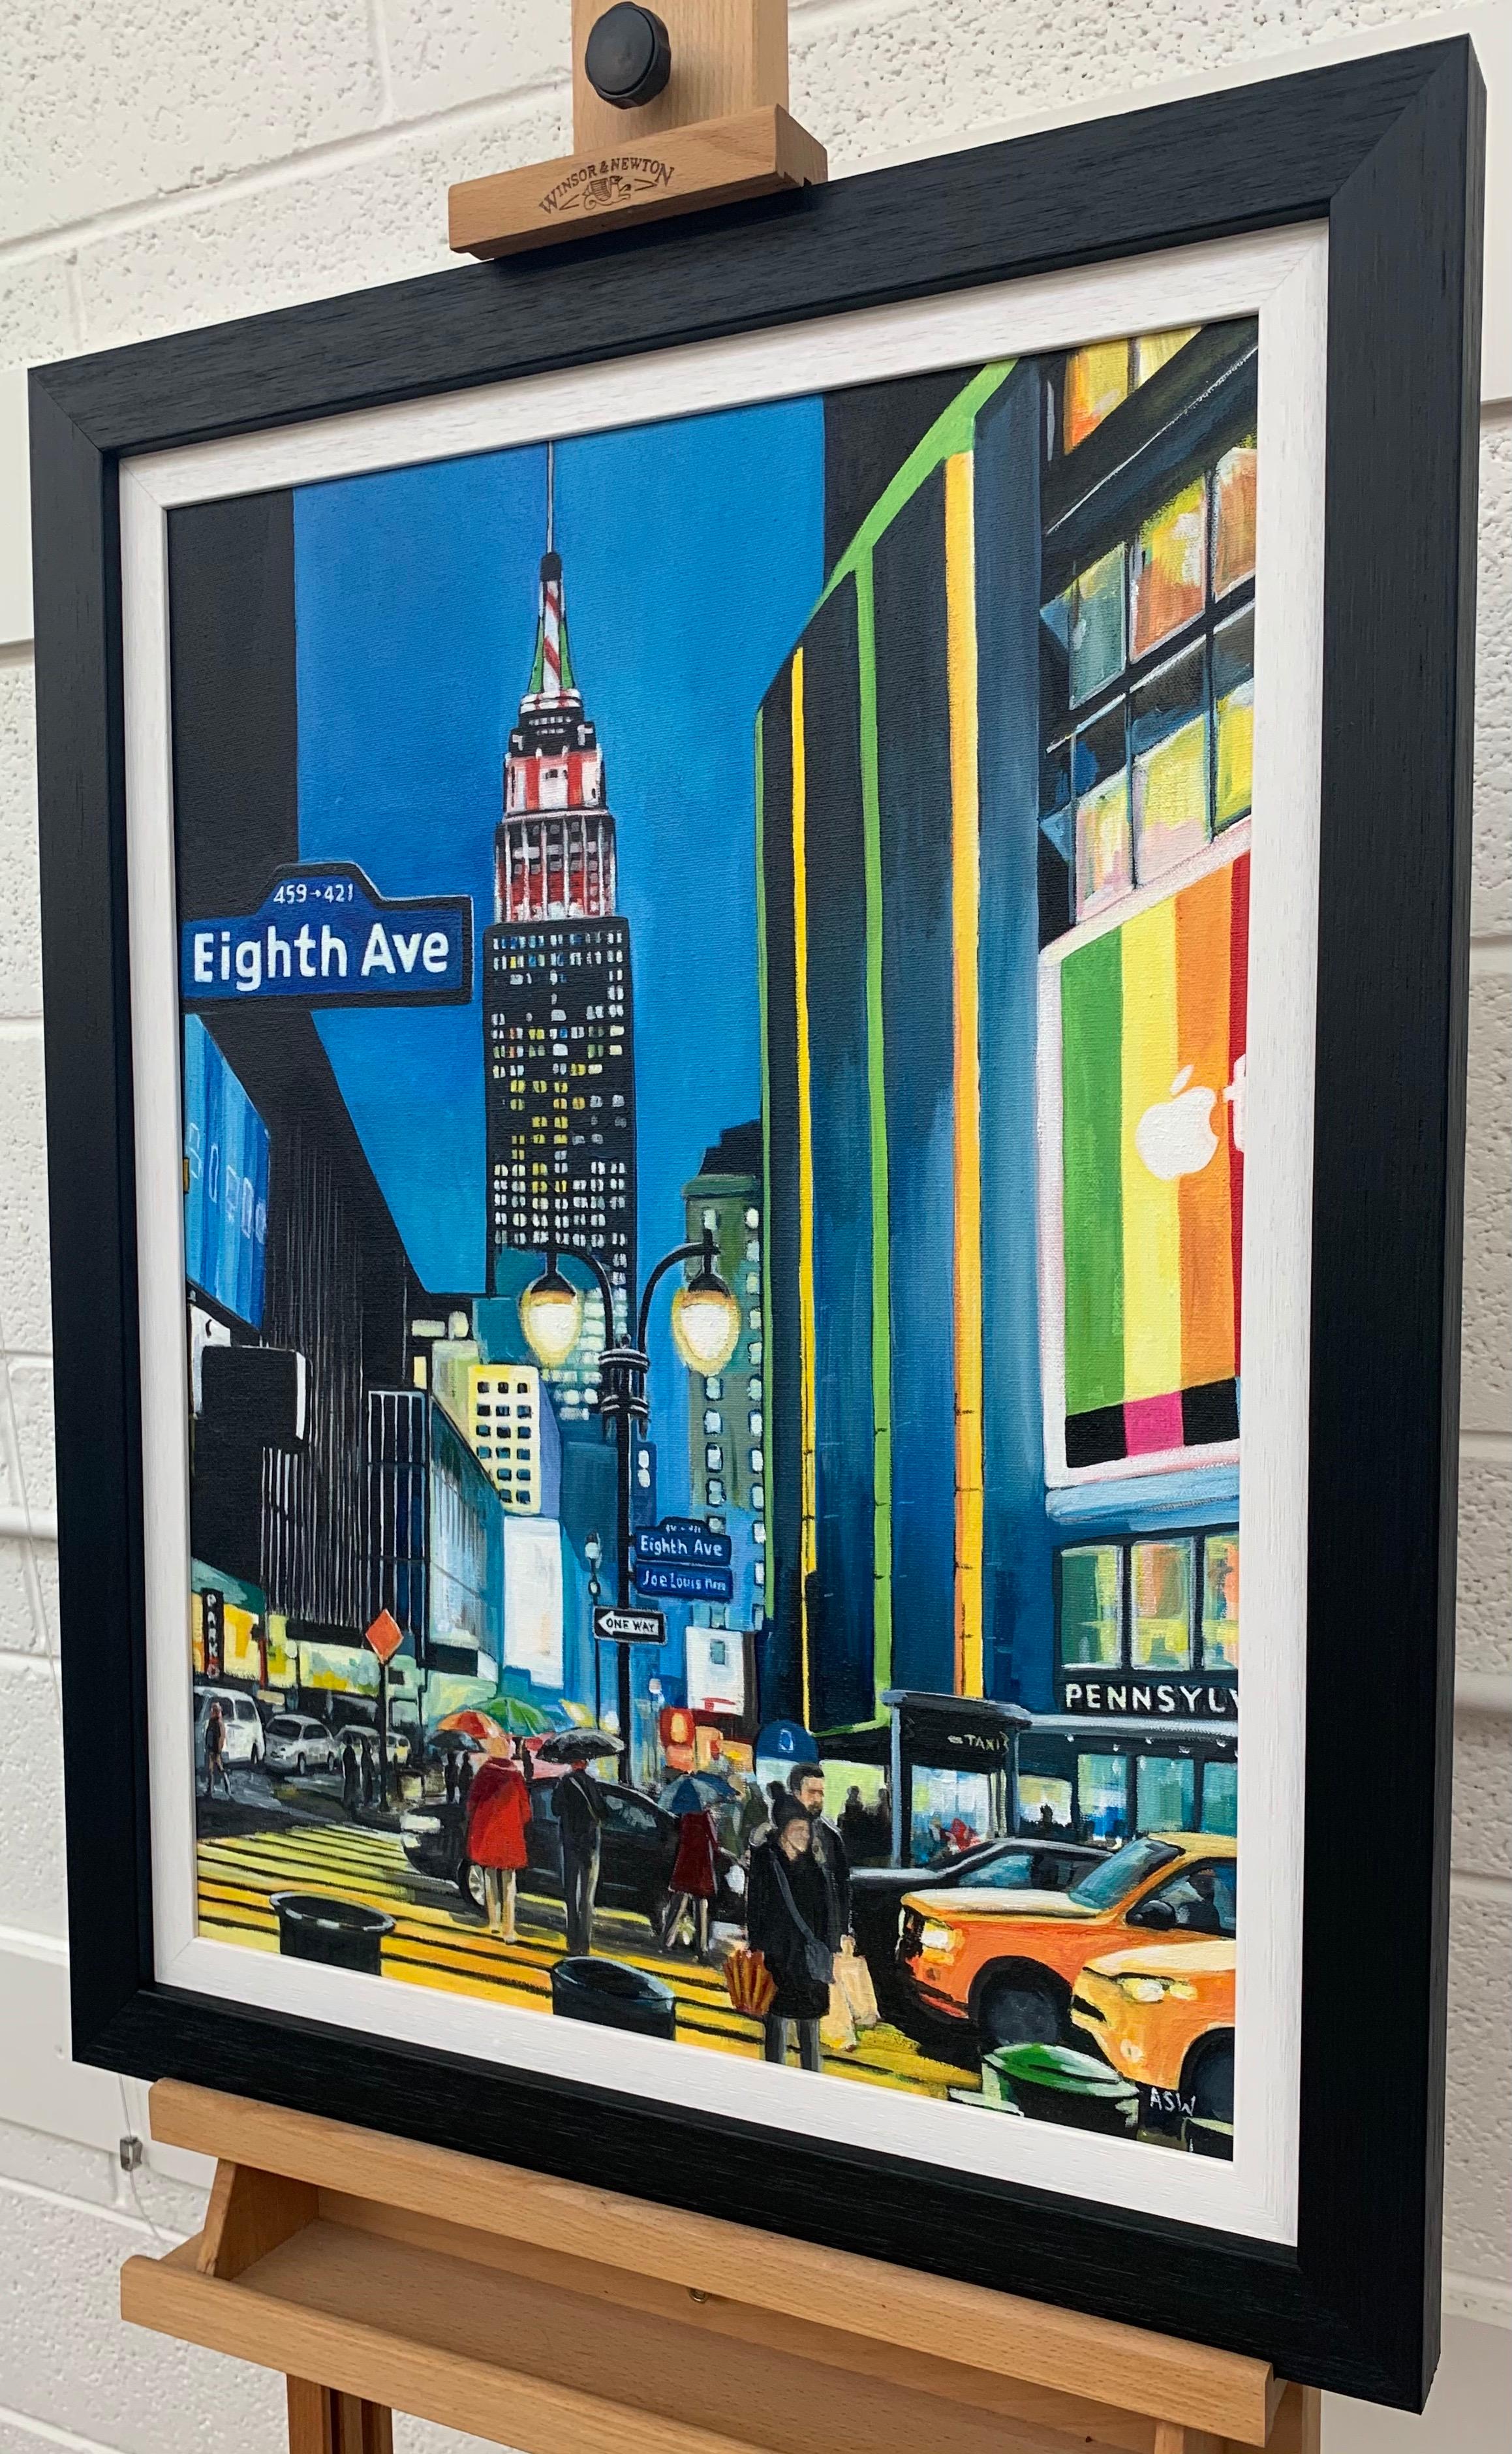 Empire State Building Eighth Avenue New York City by Contemporary British Artist - Young British Artists (YBA) Painting by Angela Wakefield